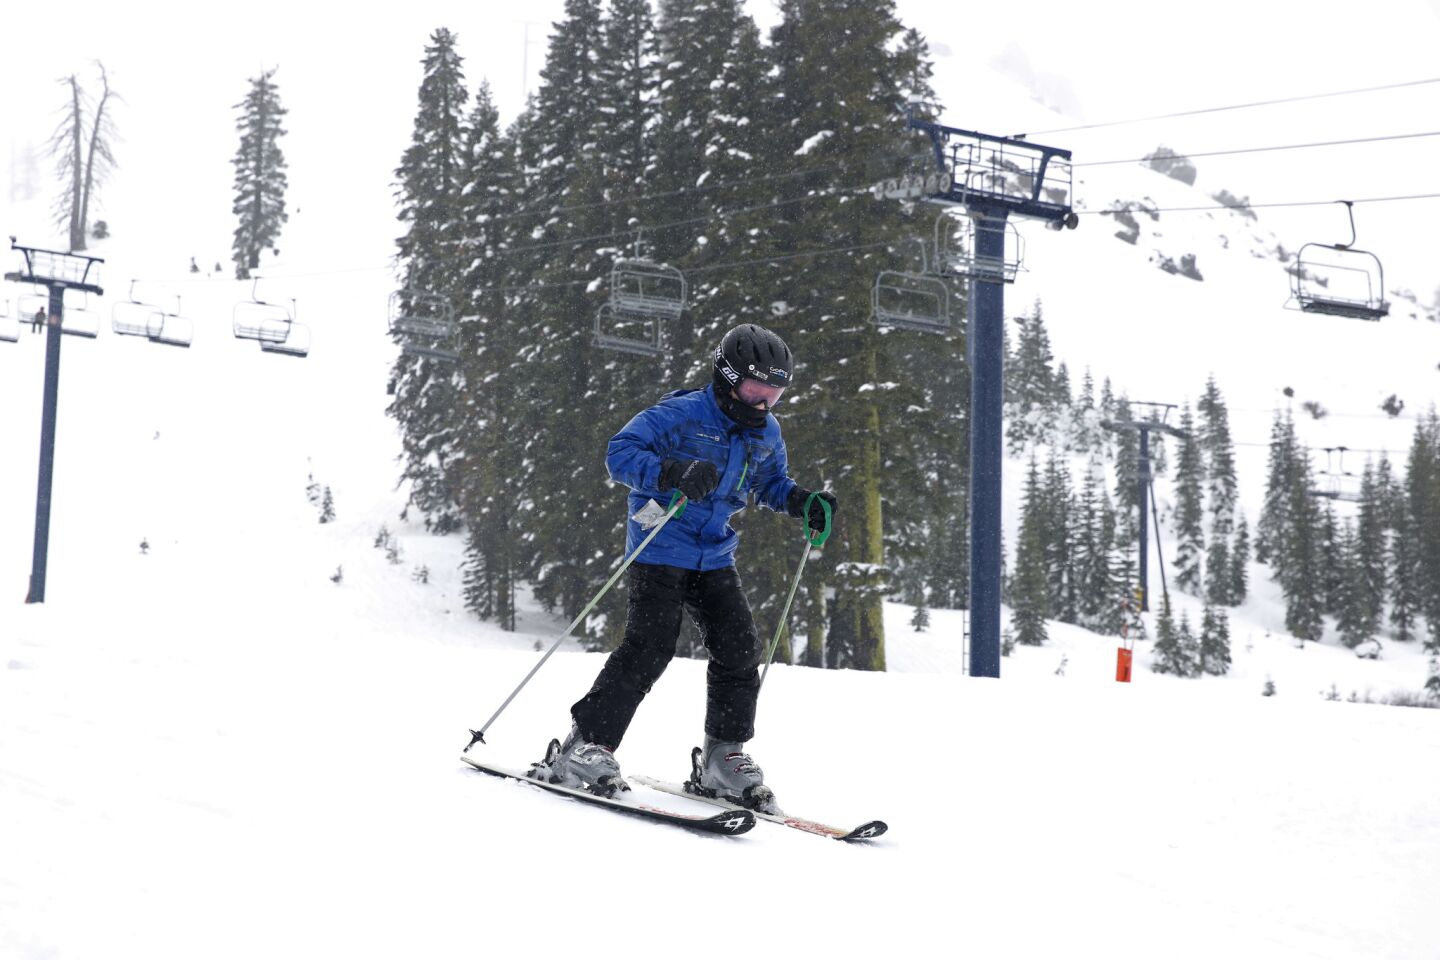 Skiers coming off the mountain endured rainy conditions all day at the Sugar Bowl Ski Resort, in Norden, Calif.